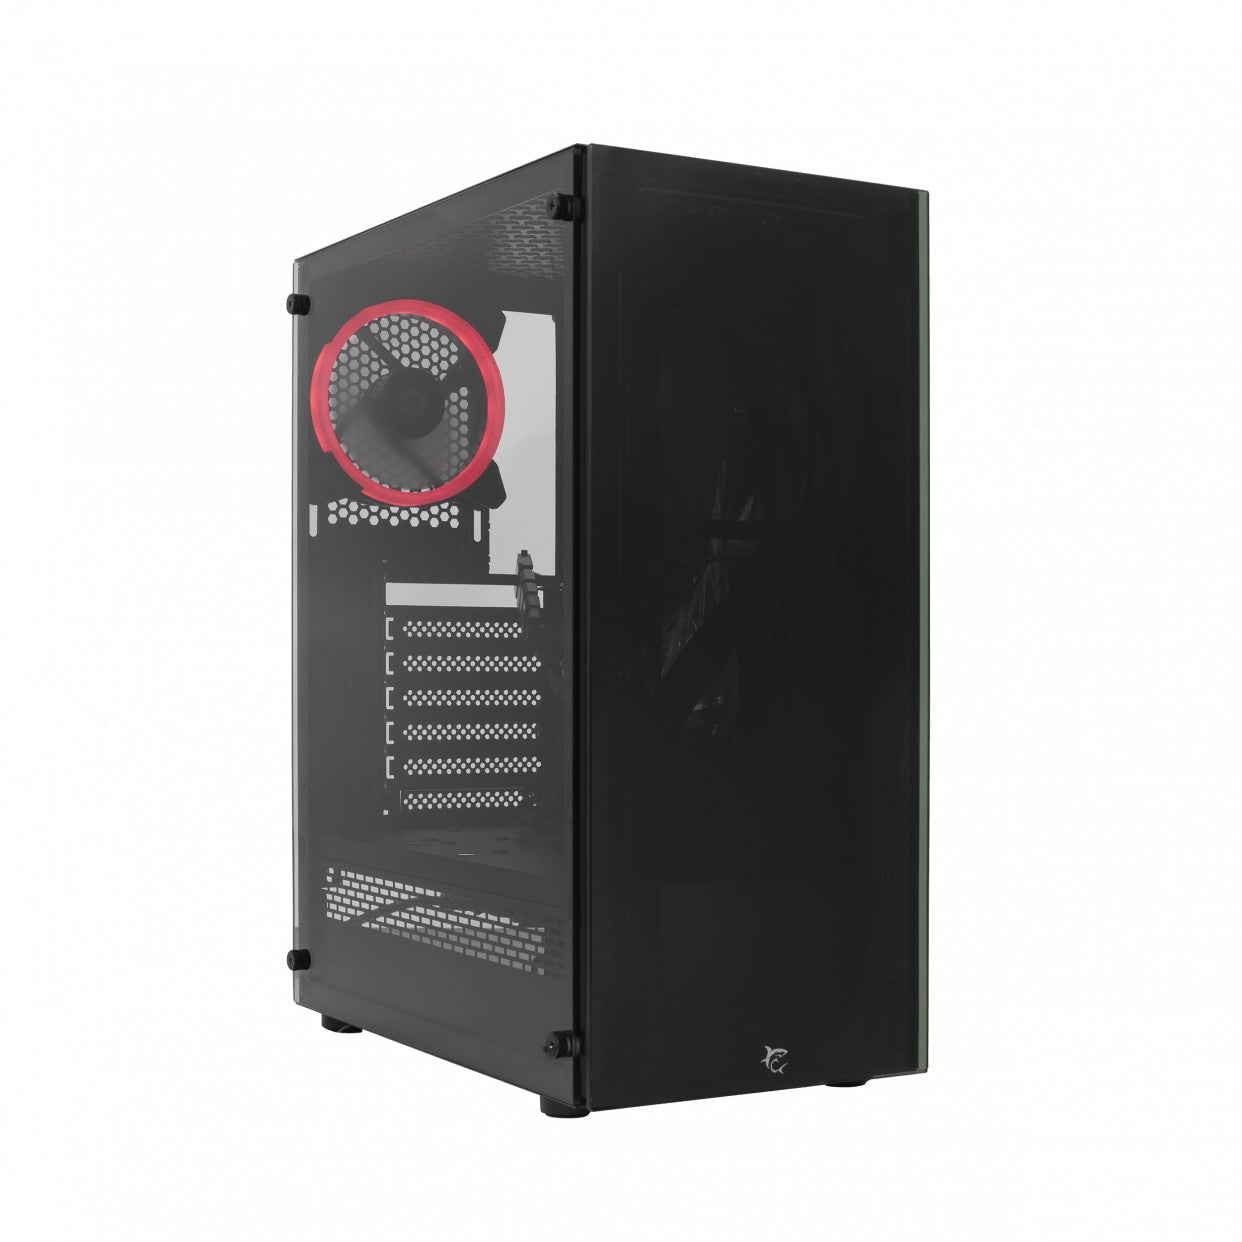 Computer Case White Shark GCC-2101 Bunker 1 Fan Red - ATX Mid Tower, Black, Tempered Glass/Metal, 1x3.5", 1x2.5",